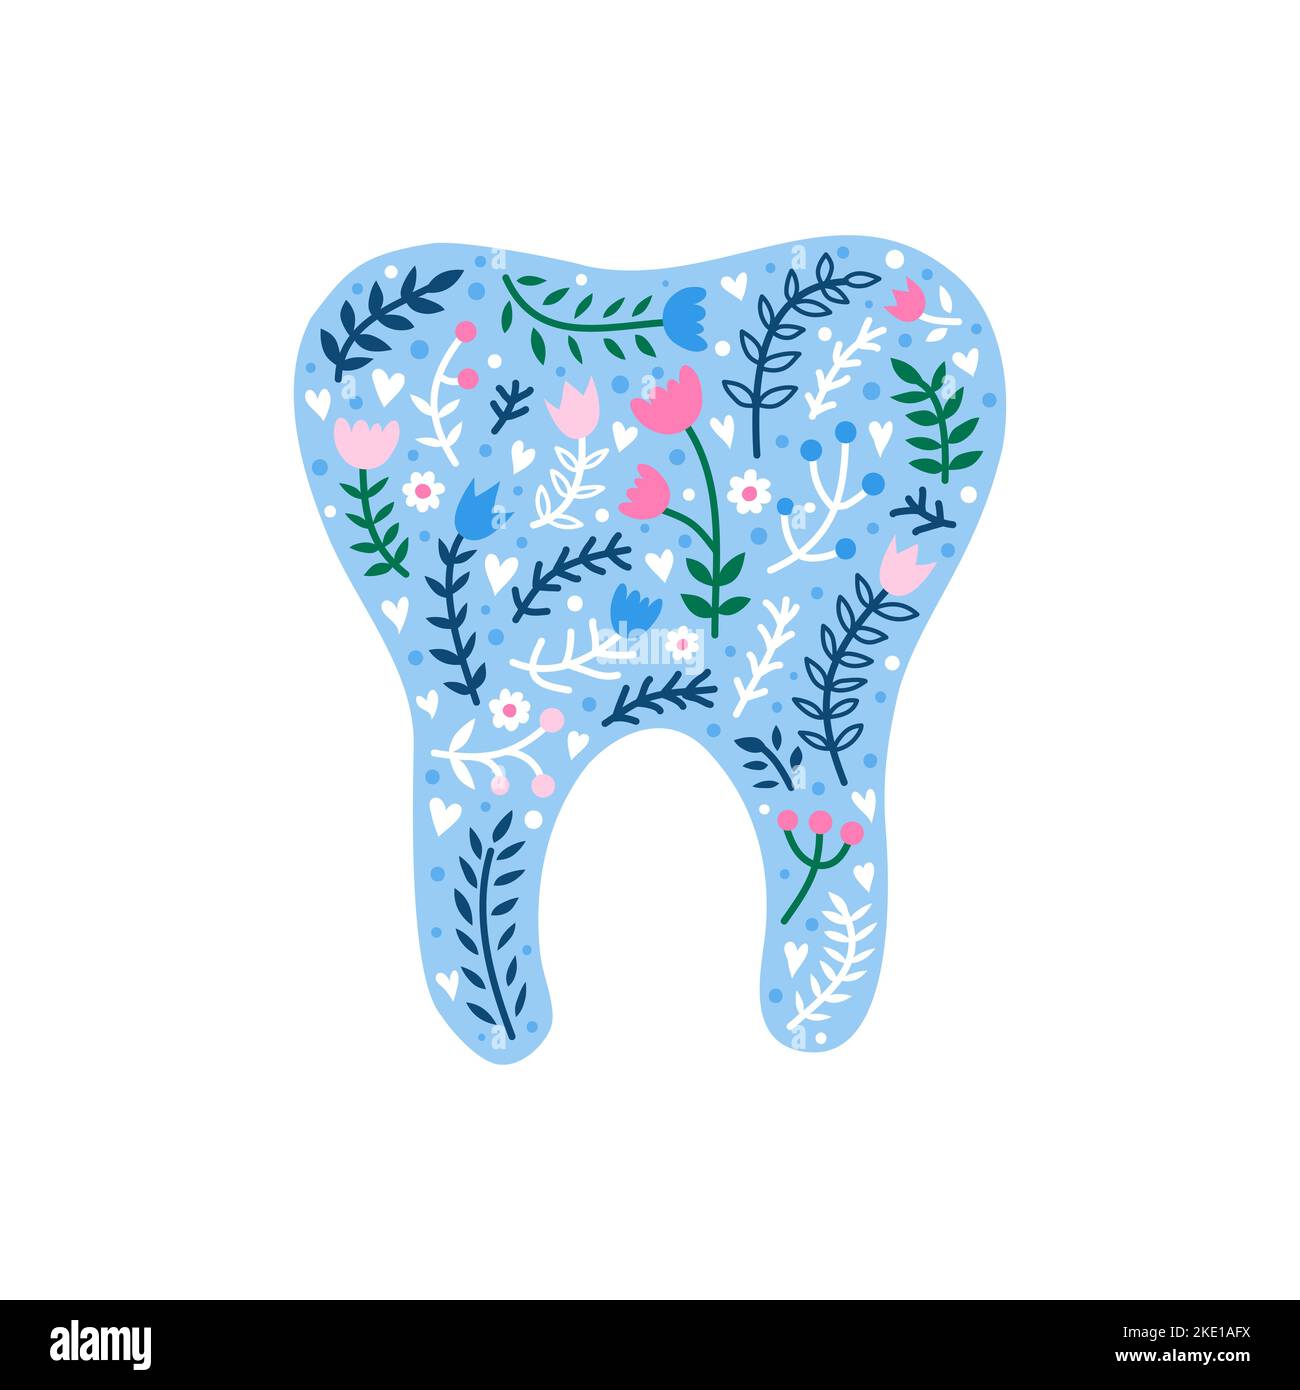 Colorful doodle tooth with Scandinavian floral ornament, flowers, leaves, herbs isolated on white background. Can be used for dental posters, prints, Stock Vector